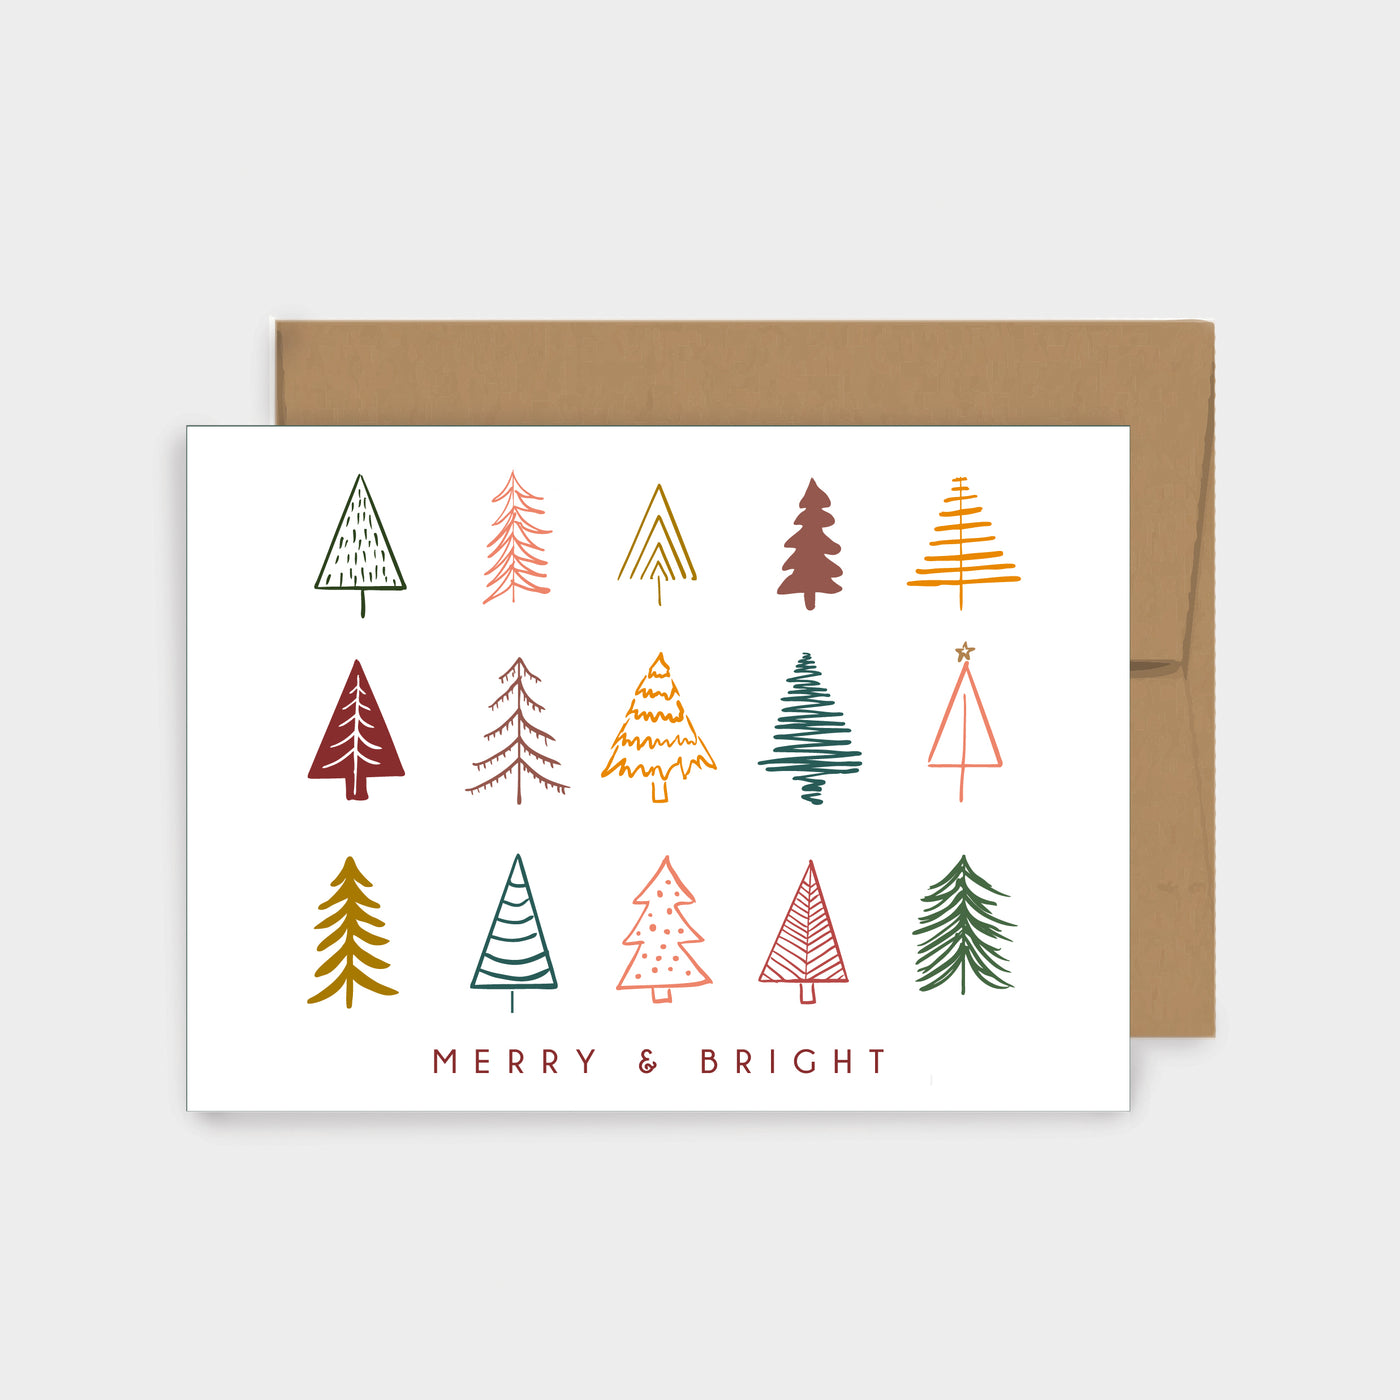 Merry + Bright Holiday Greeting Card